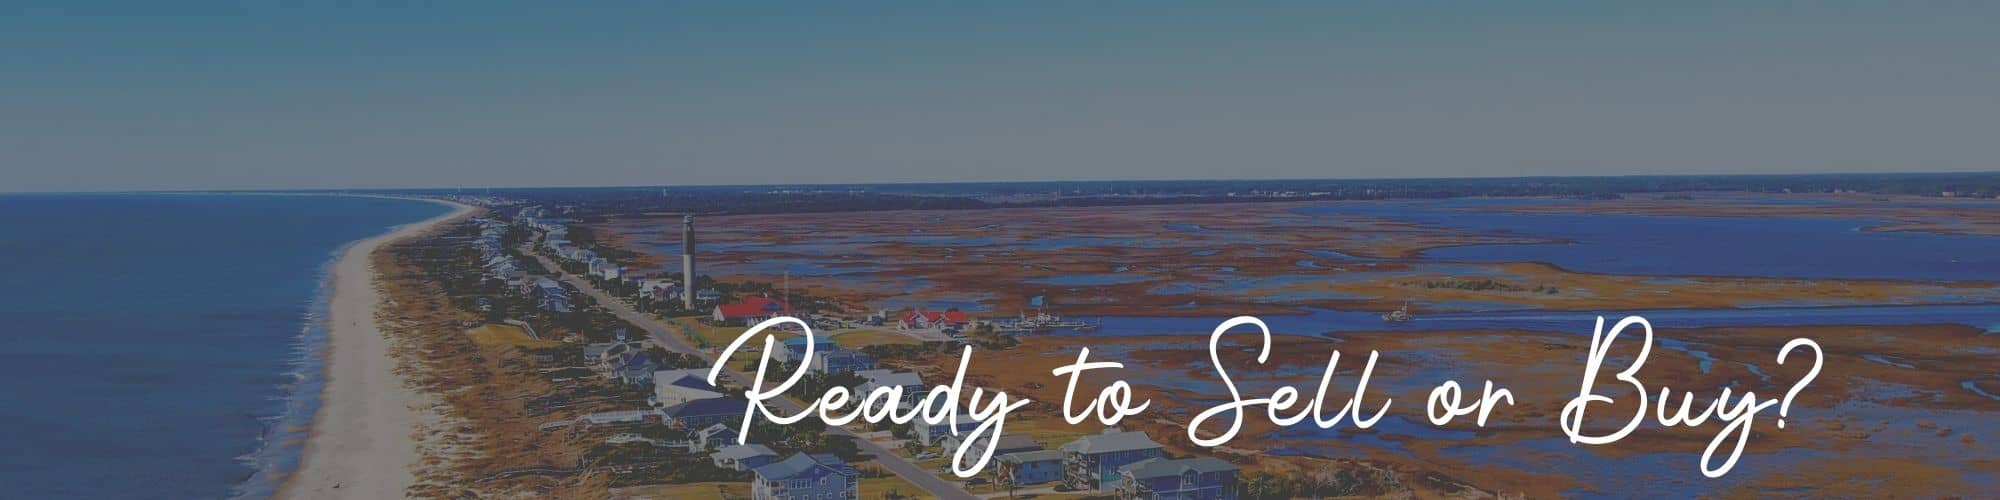 best-real-estate-agencies-in-southport-nc-oak-island-nc-st-james-nc-bolivia-nc-and-boiling-spring-lakes-nc